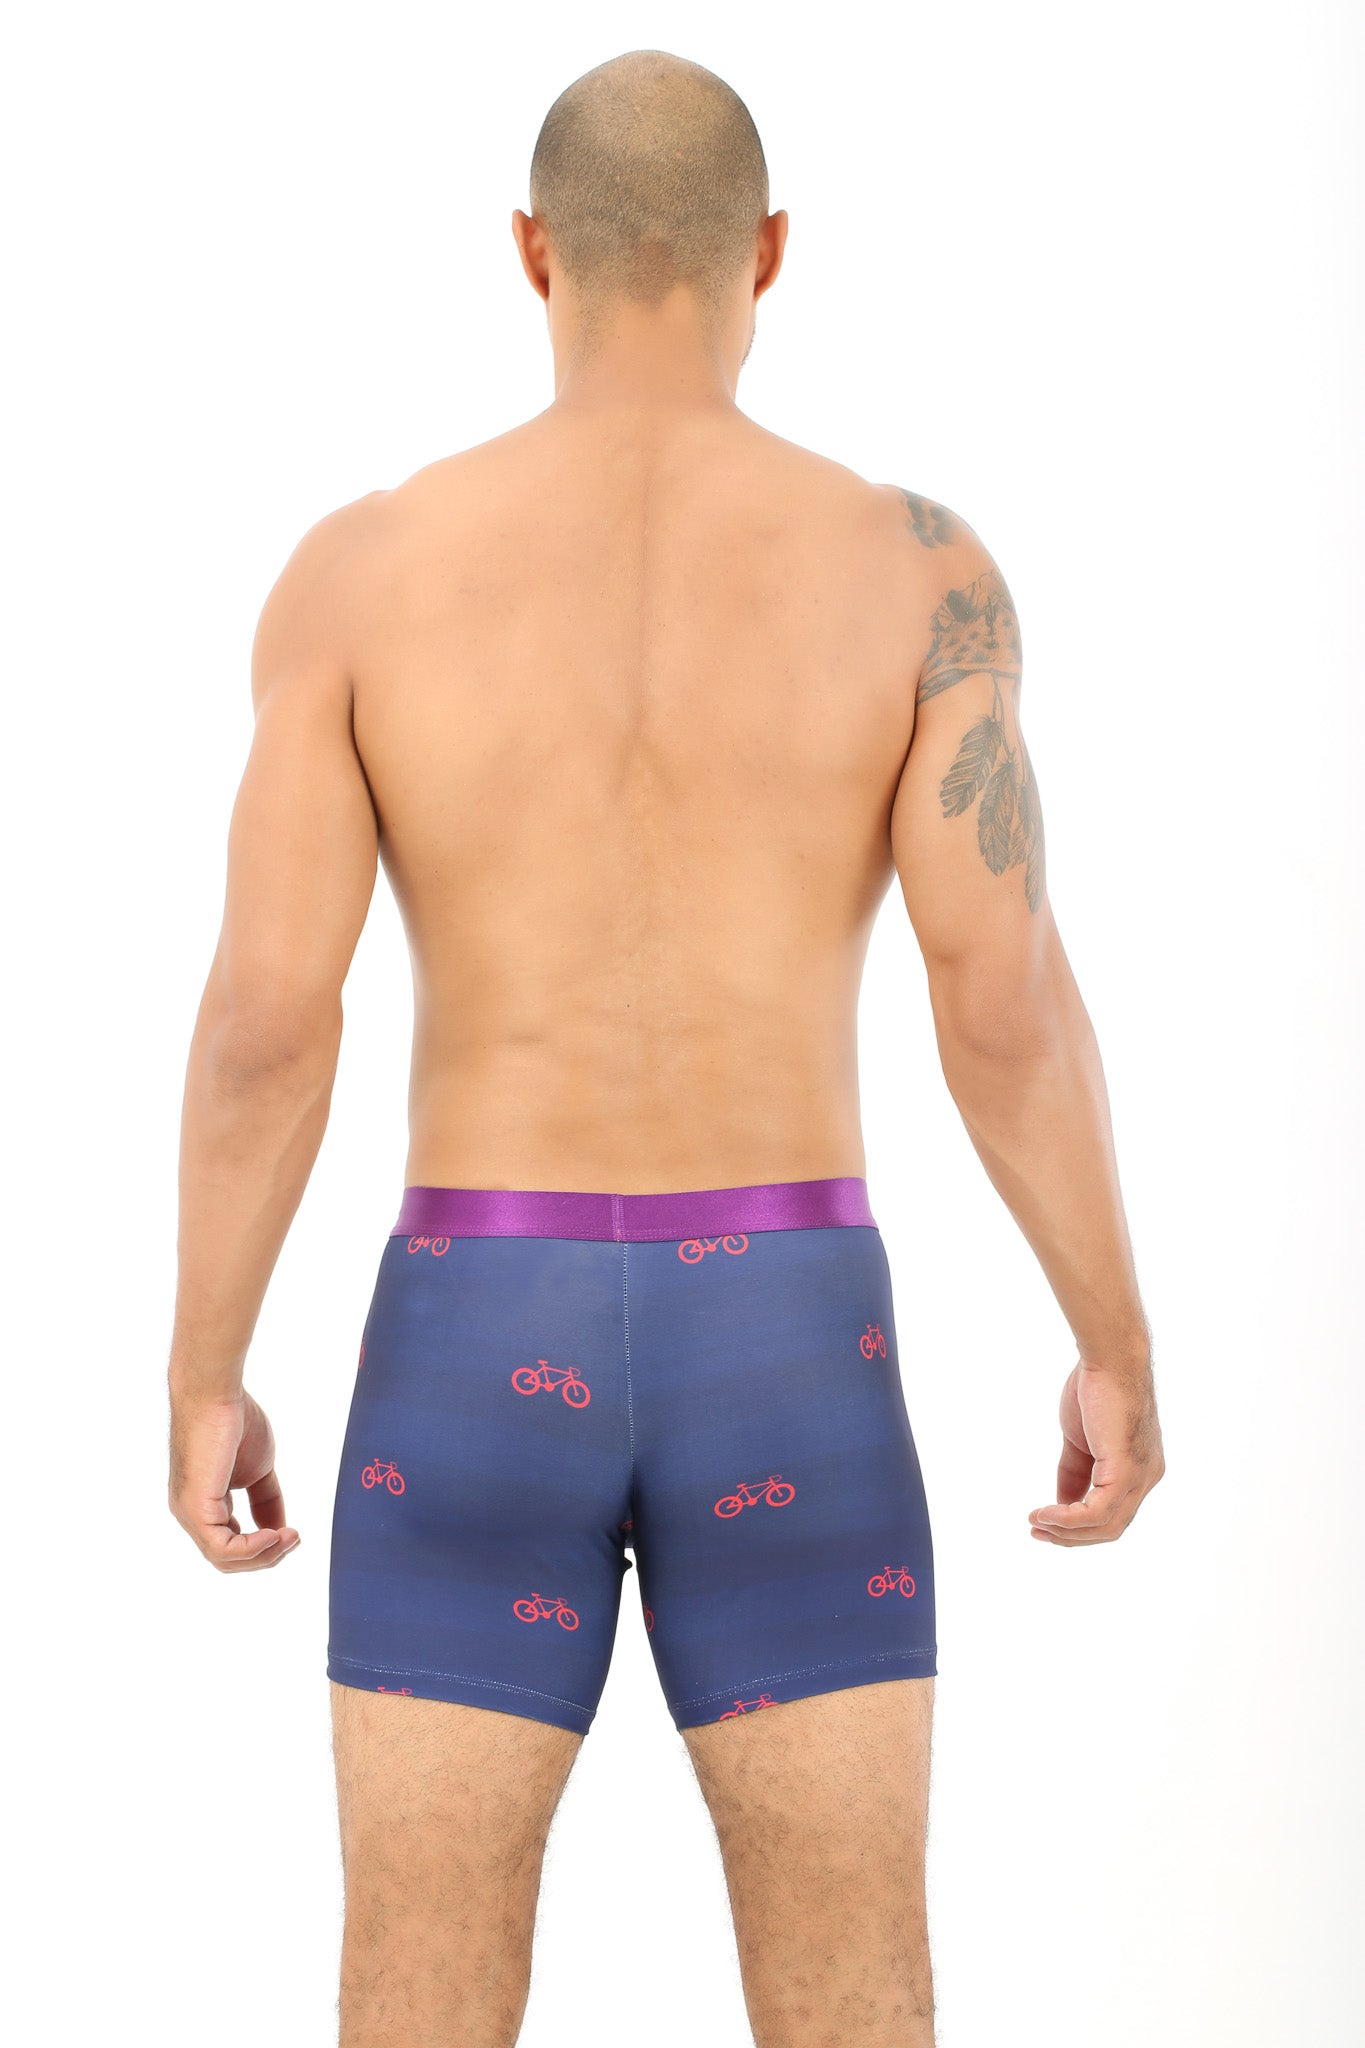 The back view of a man wearing Cyclist Underwear.